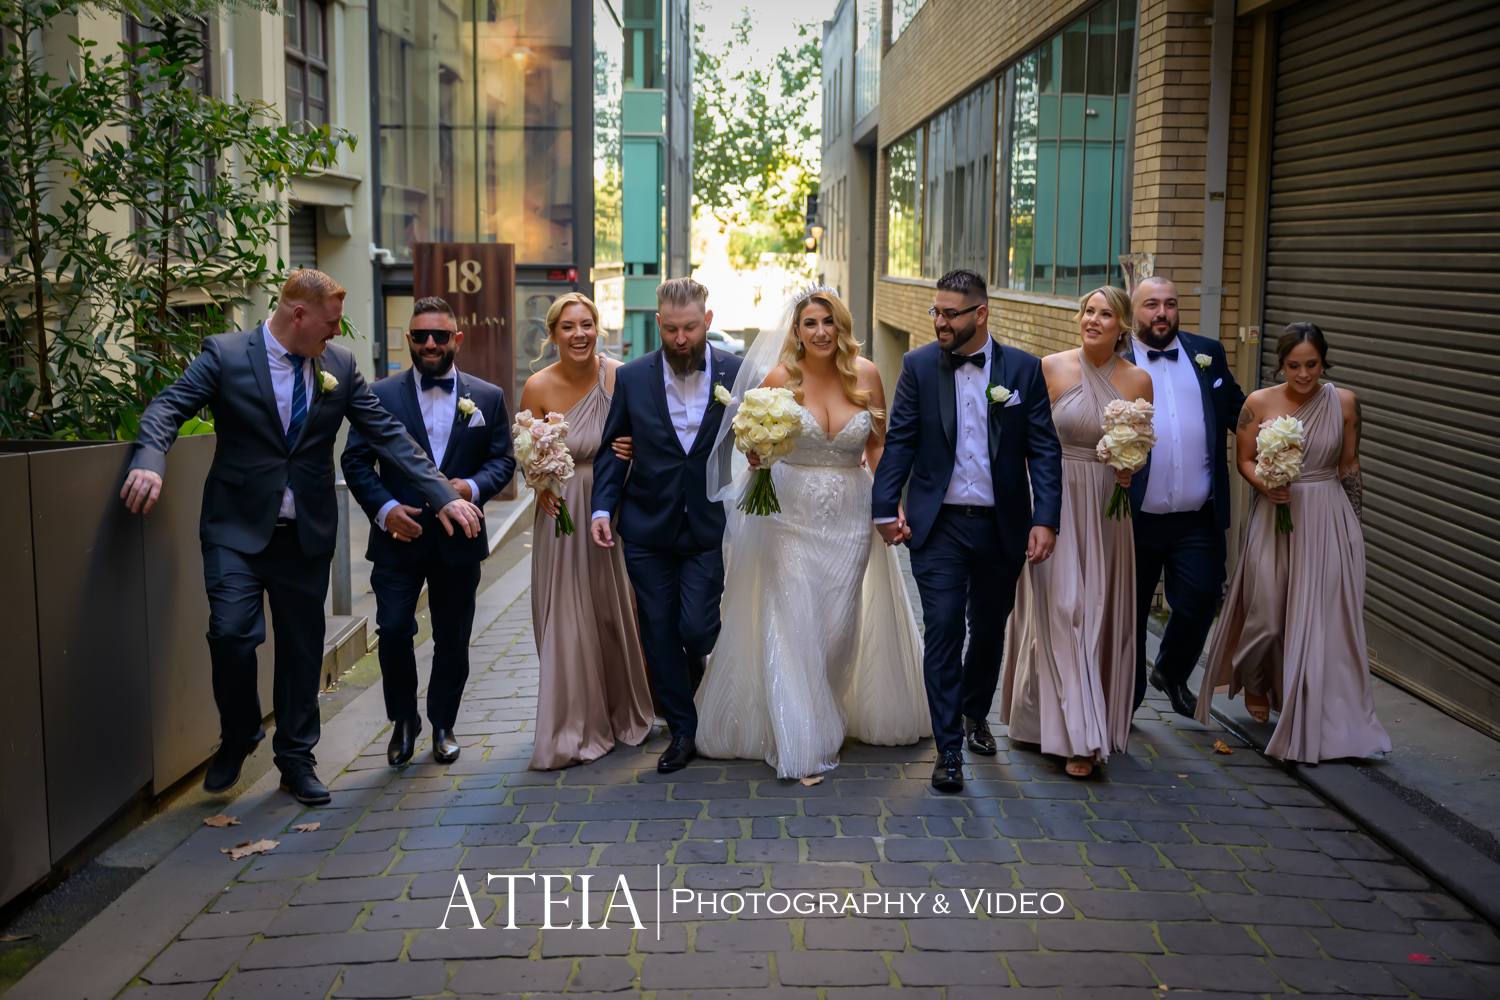 , Maria and Vahe’s wedding at Vogue Ballroom captured by ATEIA Photography &#038; Video